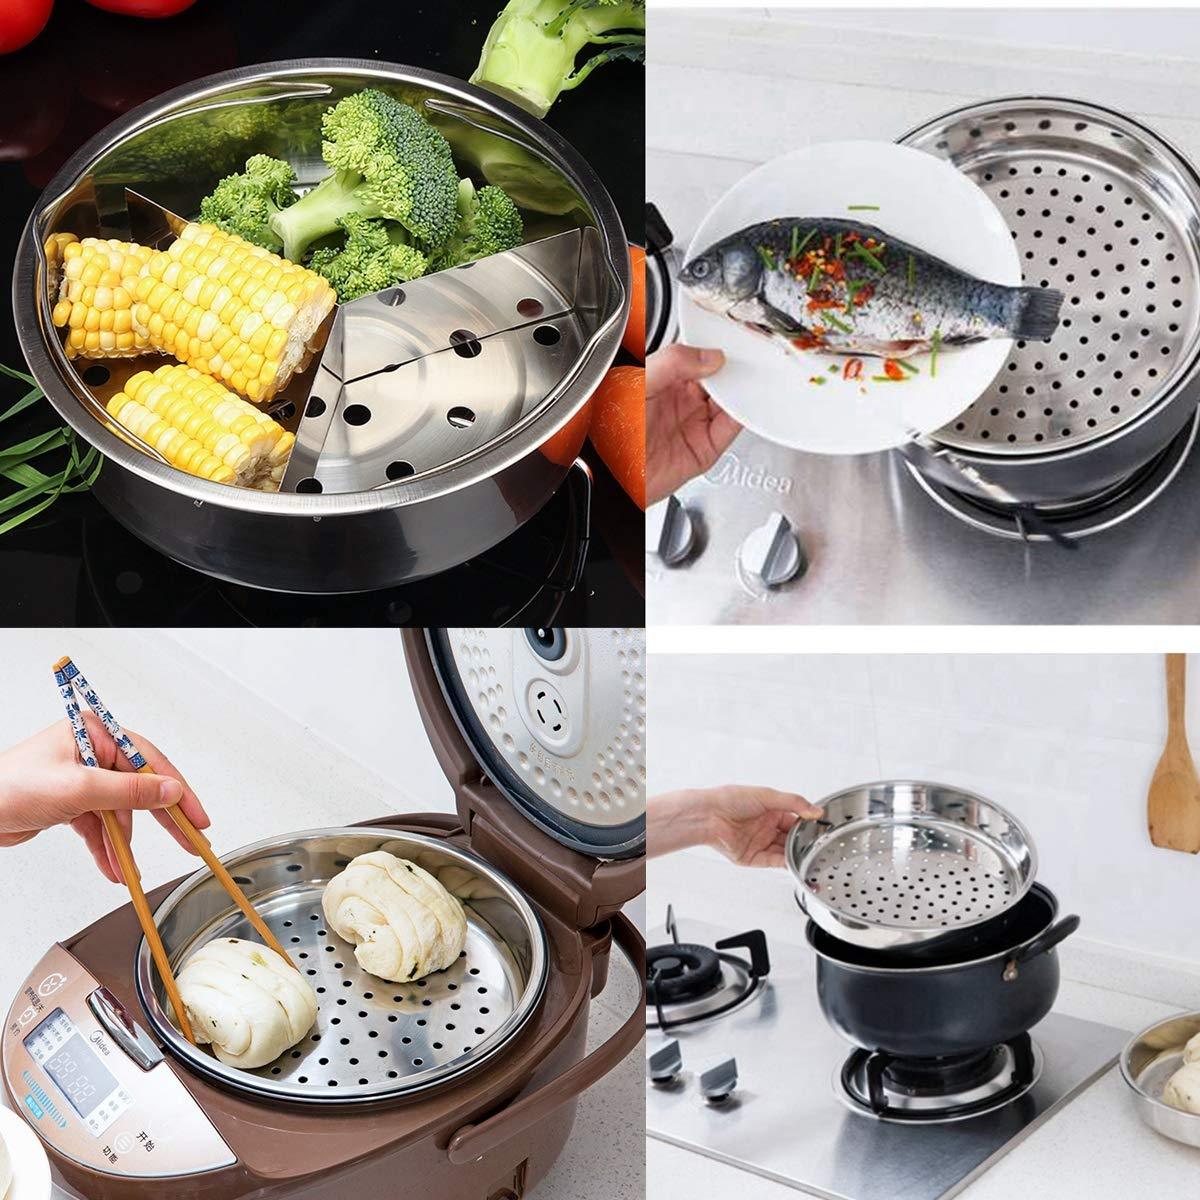 Saim Round Steaming Basket/Stainless Steel Food Cooking Steamer Rack Cookware 8.3 Inch Diameter - CookCave